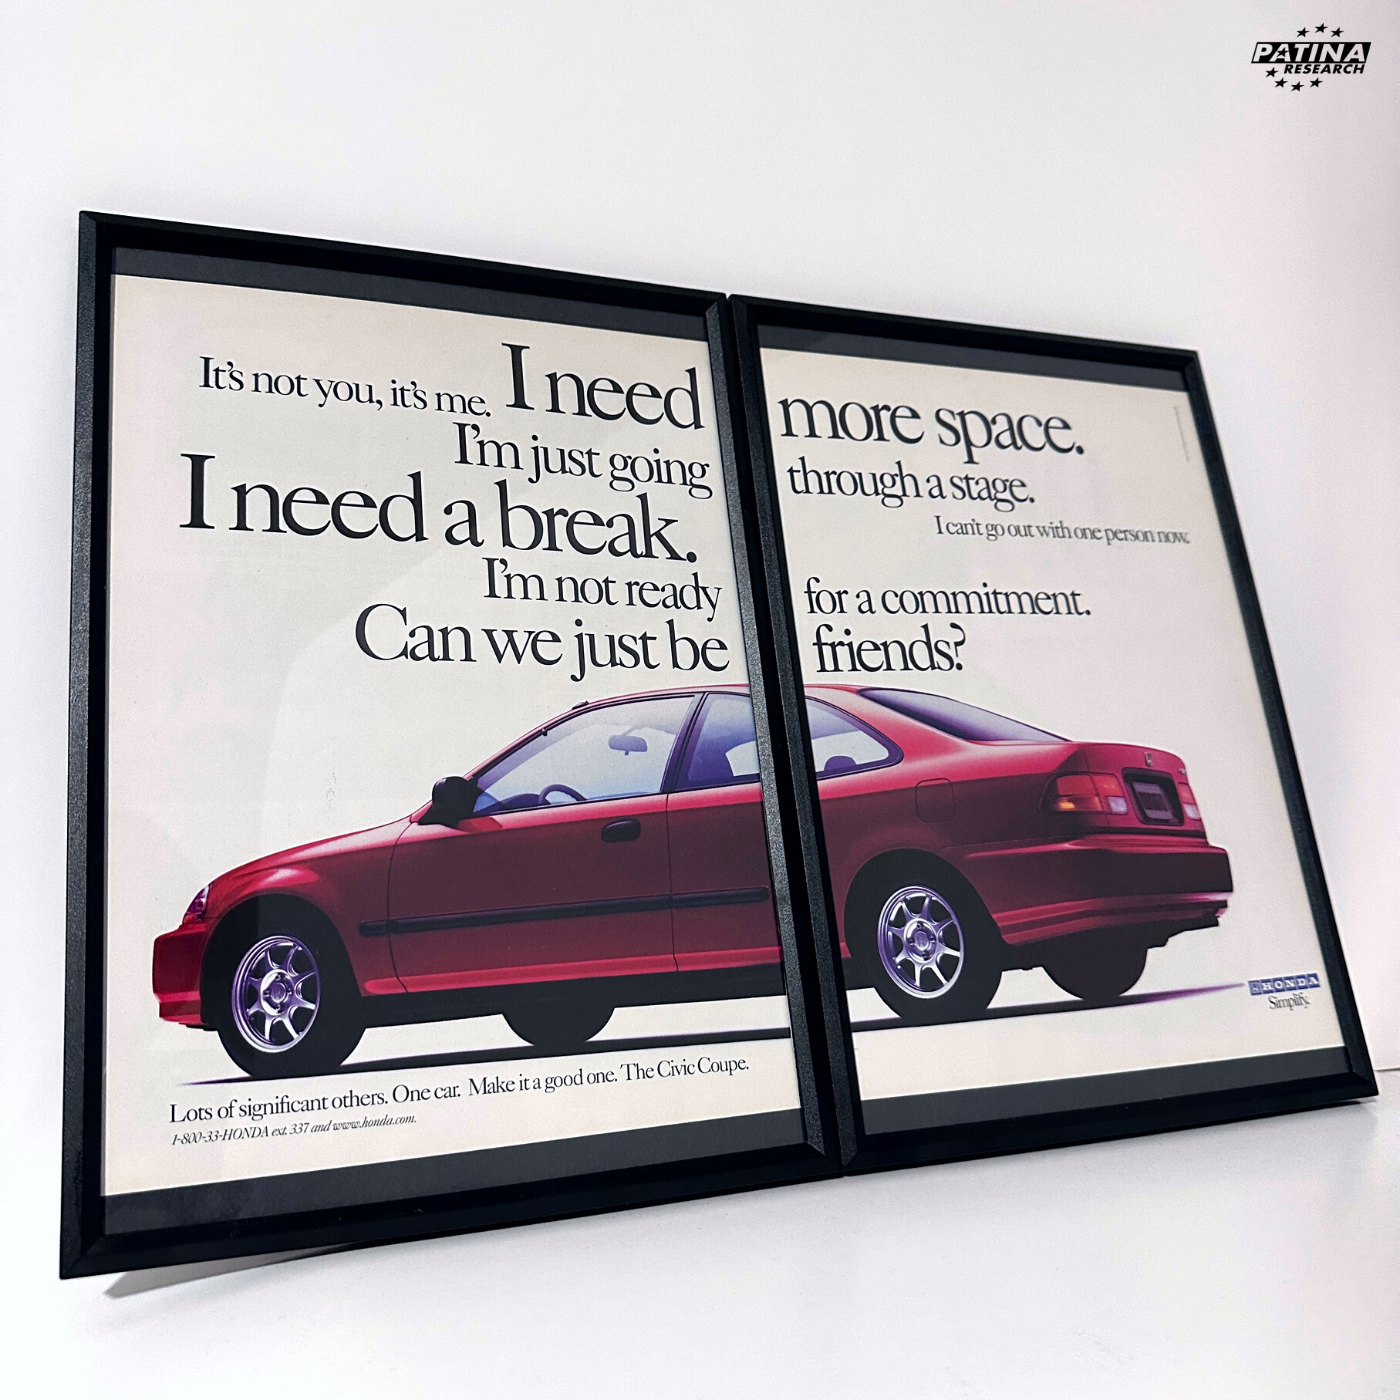 The Honda Civic Coupe I need more space framed ad